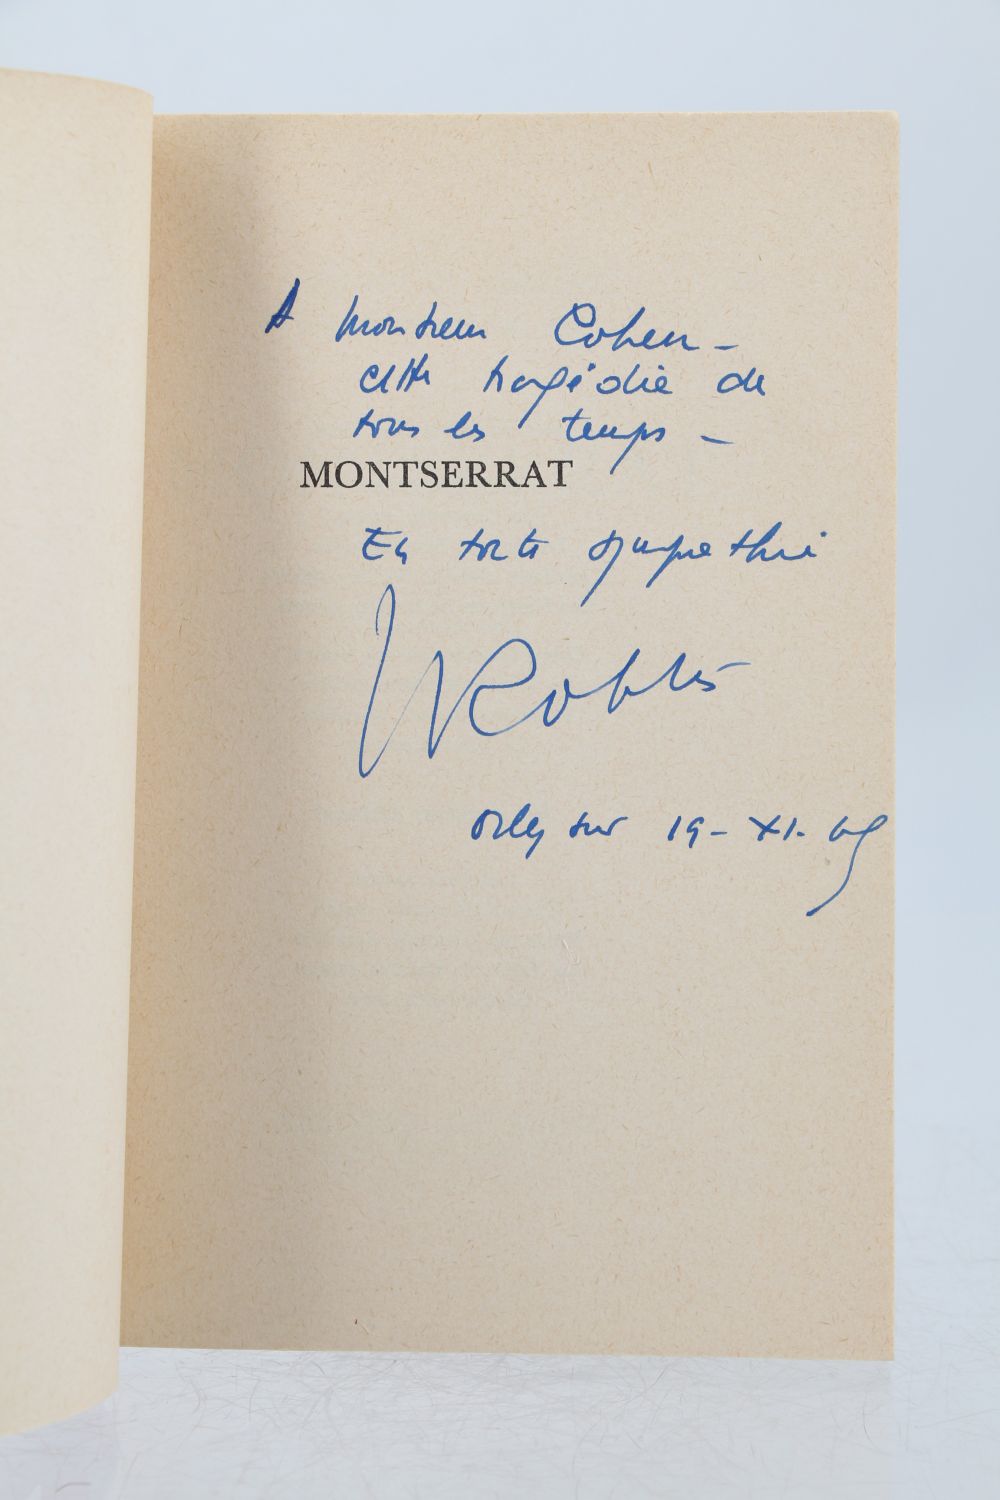 ROBLES : Montserrat - Signed book, First edition - Edition